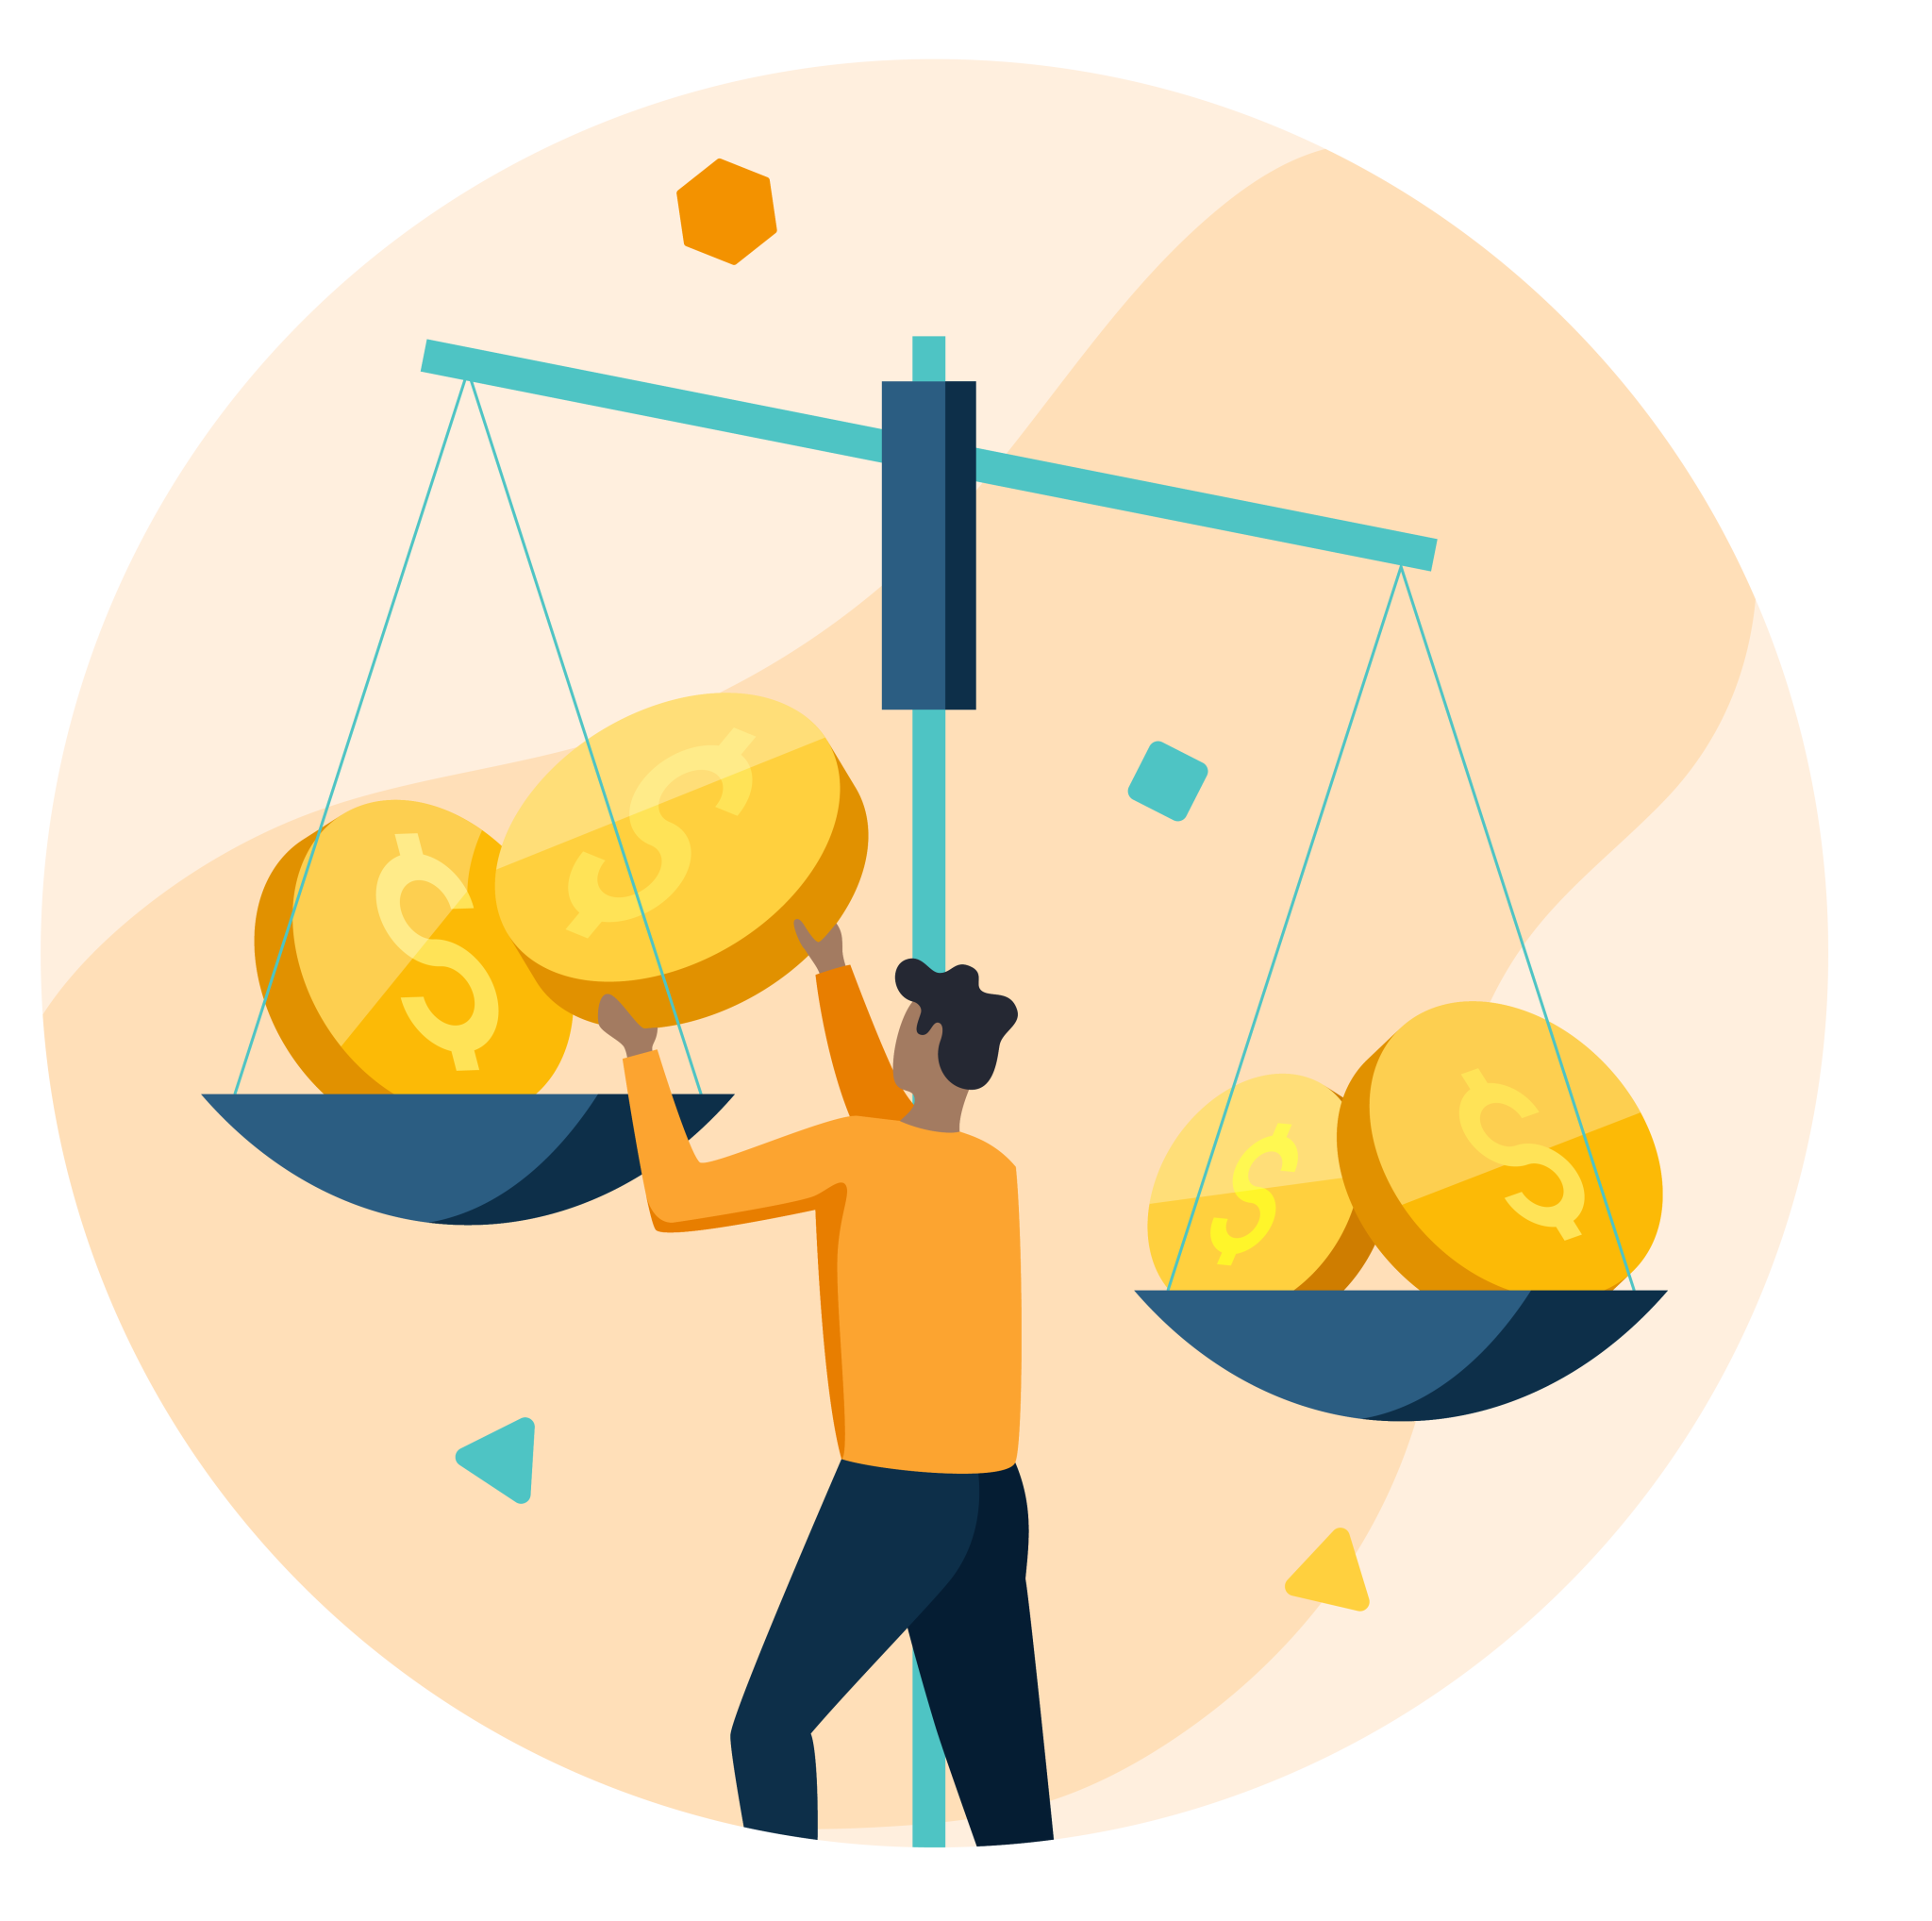 Illustration of a person placing an oversized coin into an oversized scale to balance it